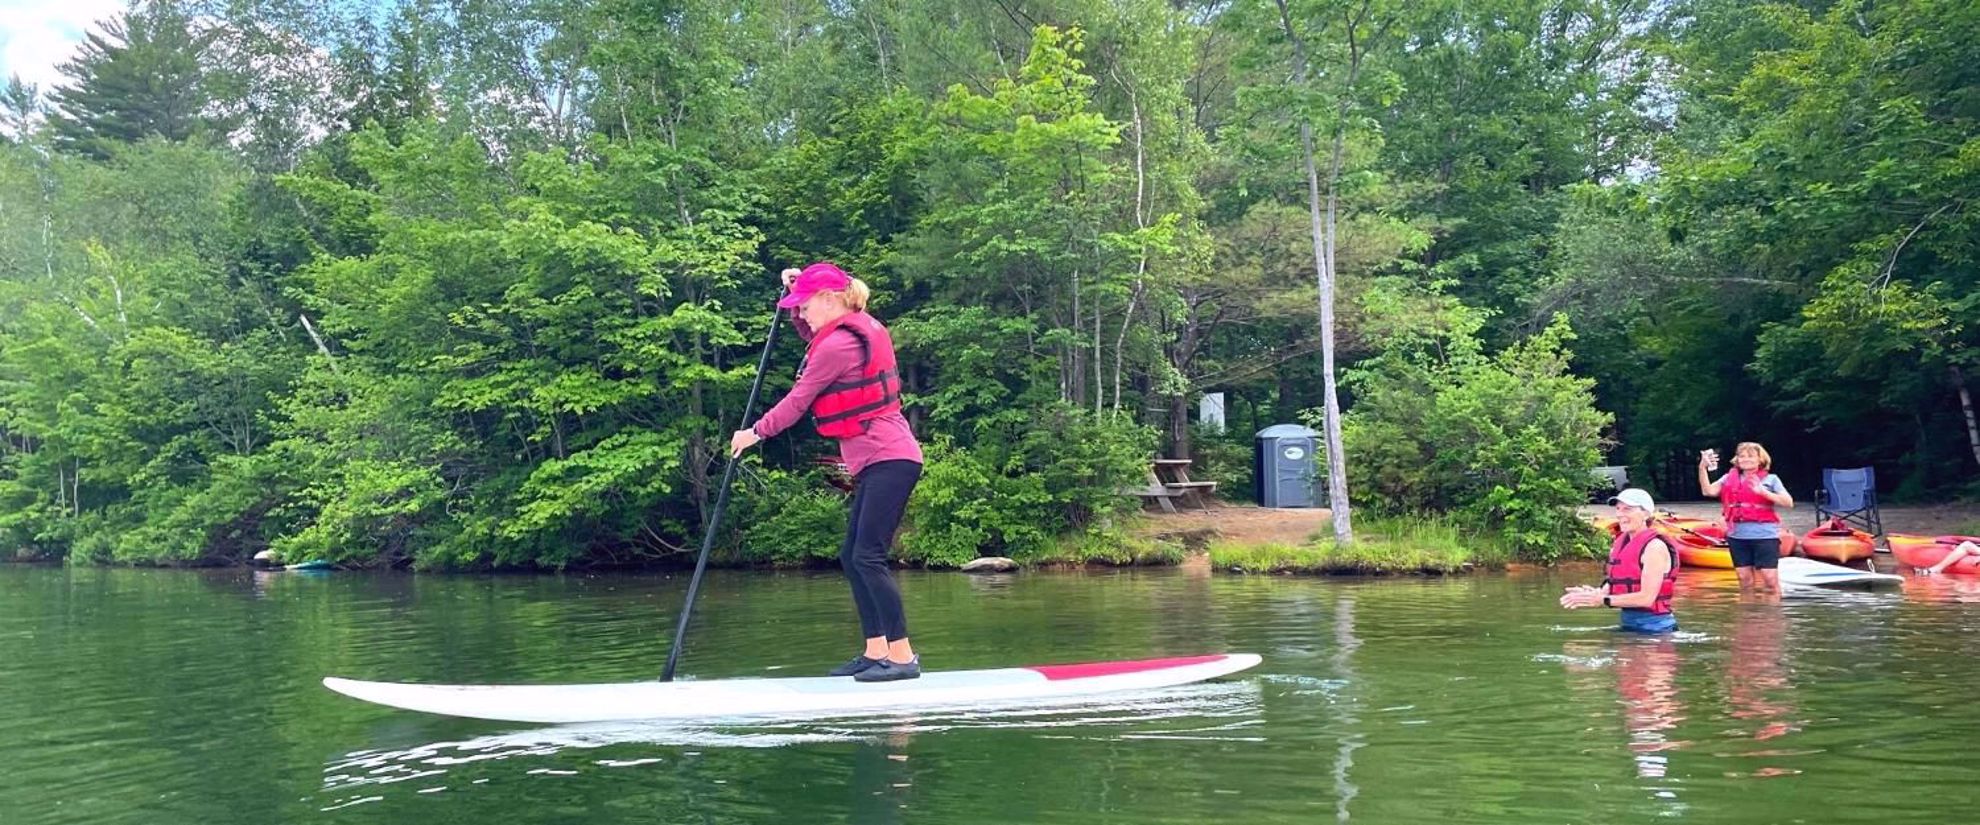 learn to stand up paddle board on a women's adventure tour